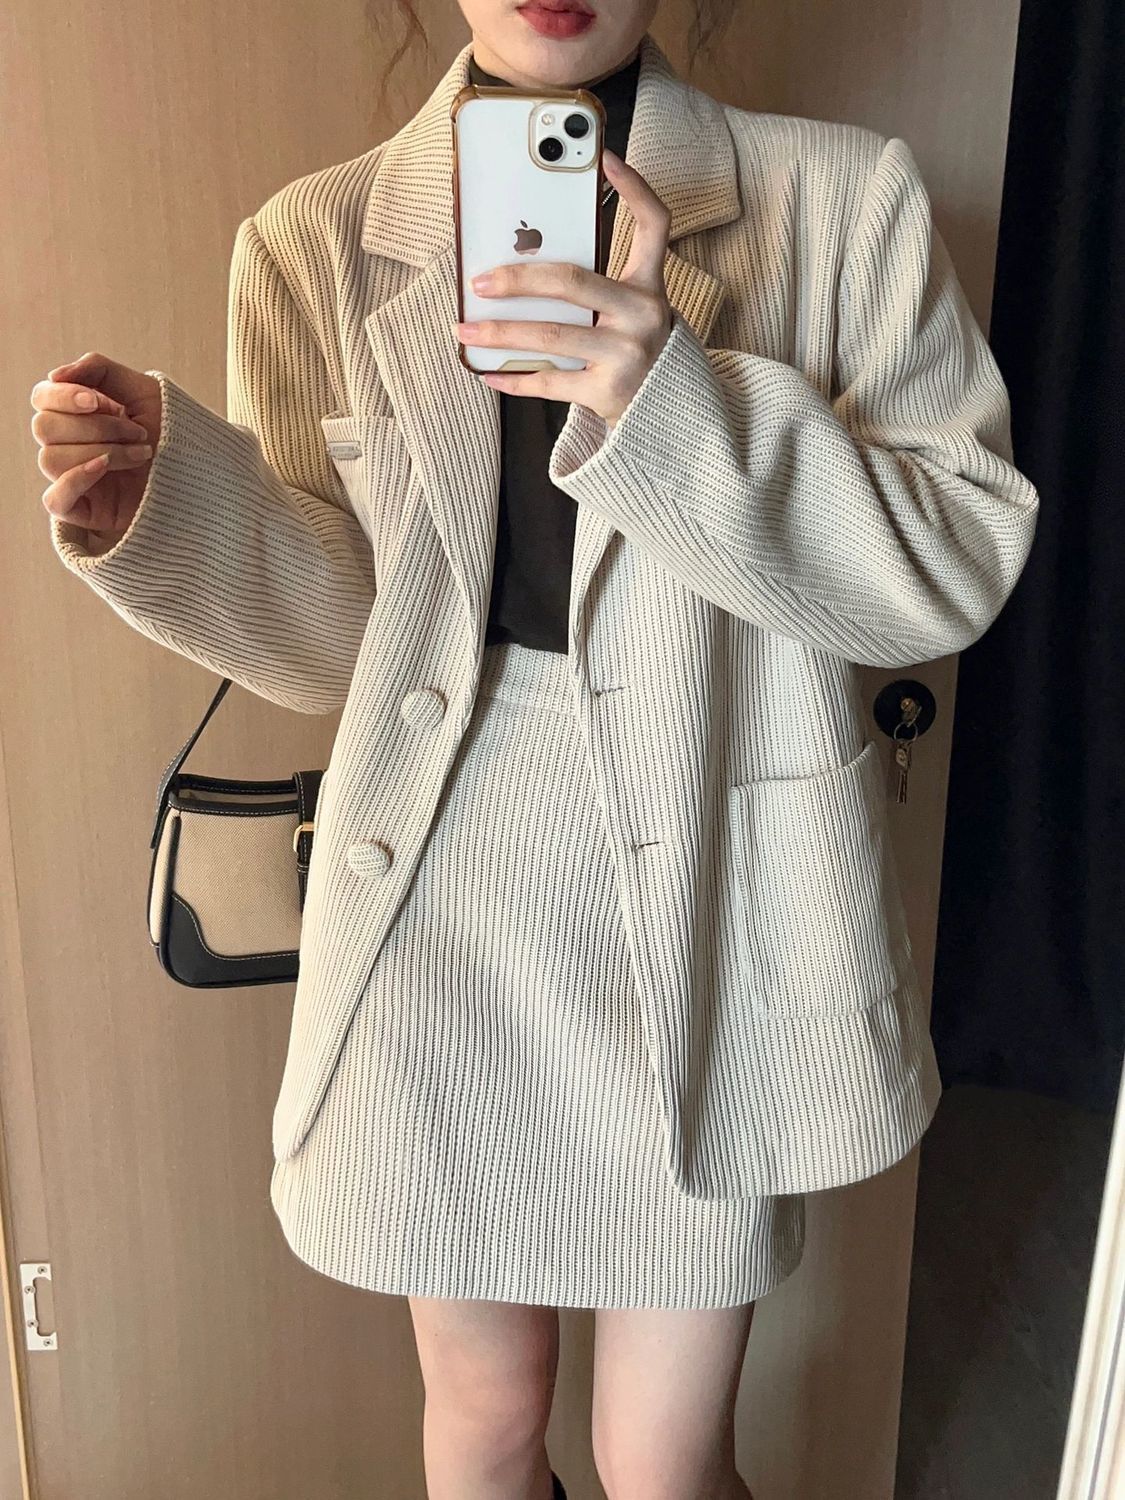 Autumn and winter new fashion suit for women with elegant style, ladylike short suit jacket, slim skirt for women, two-piece set